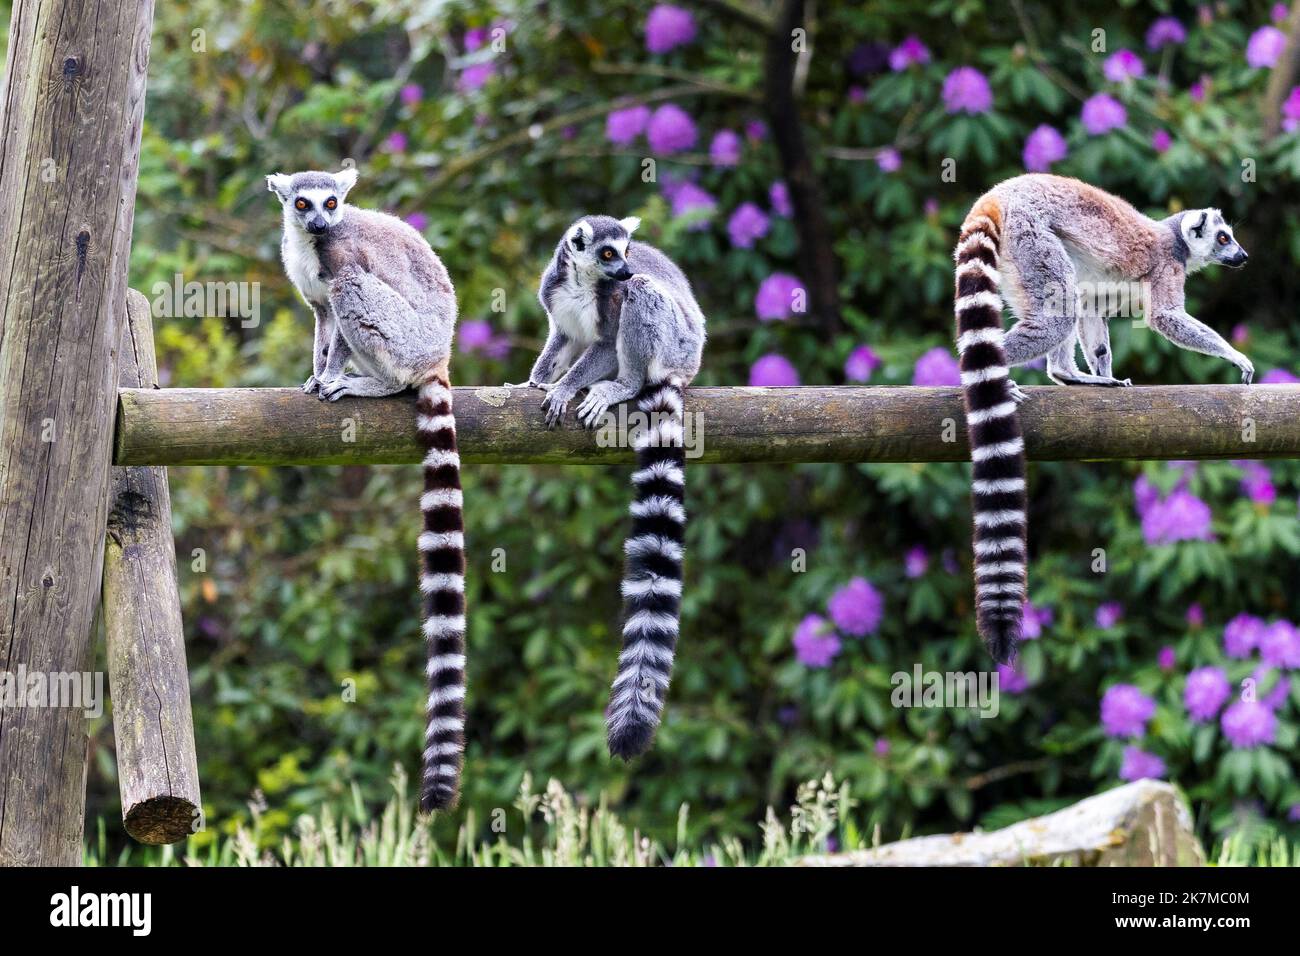 A portrait of 3 ring tailed lemurs sitting on a wooden beam in a zoo. the animals are looking around. the mammals are very cute. Stock Photo